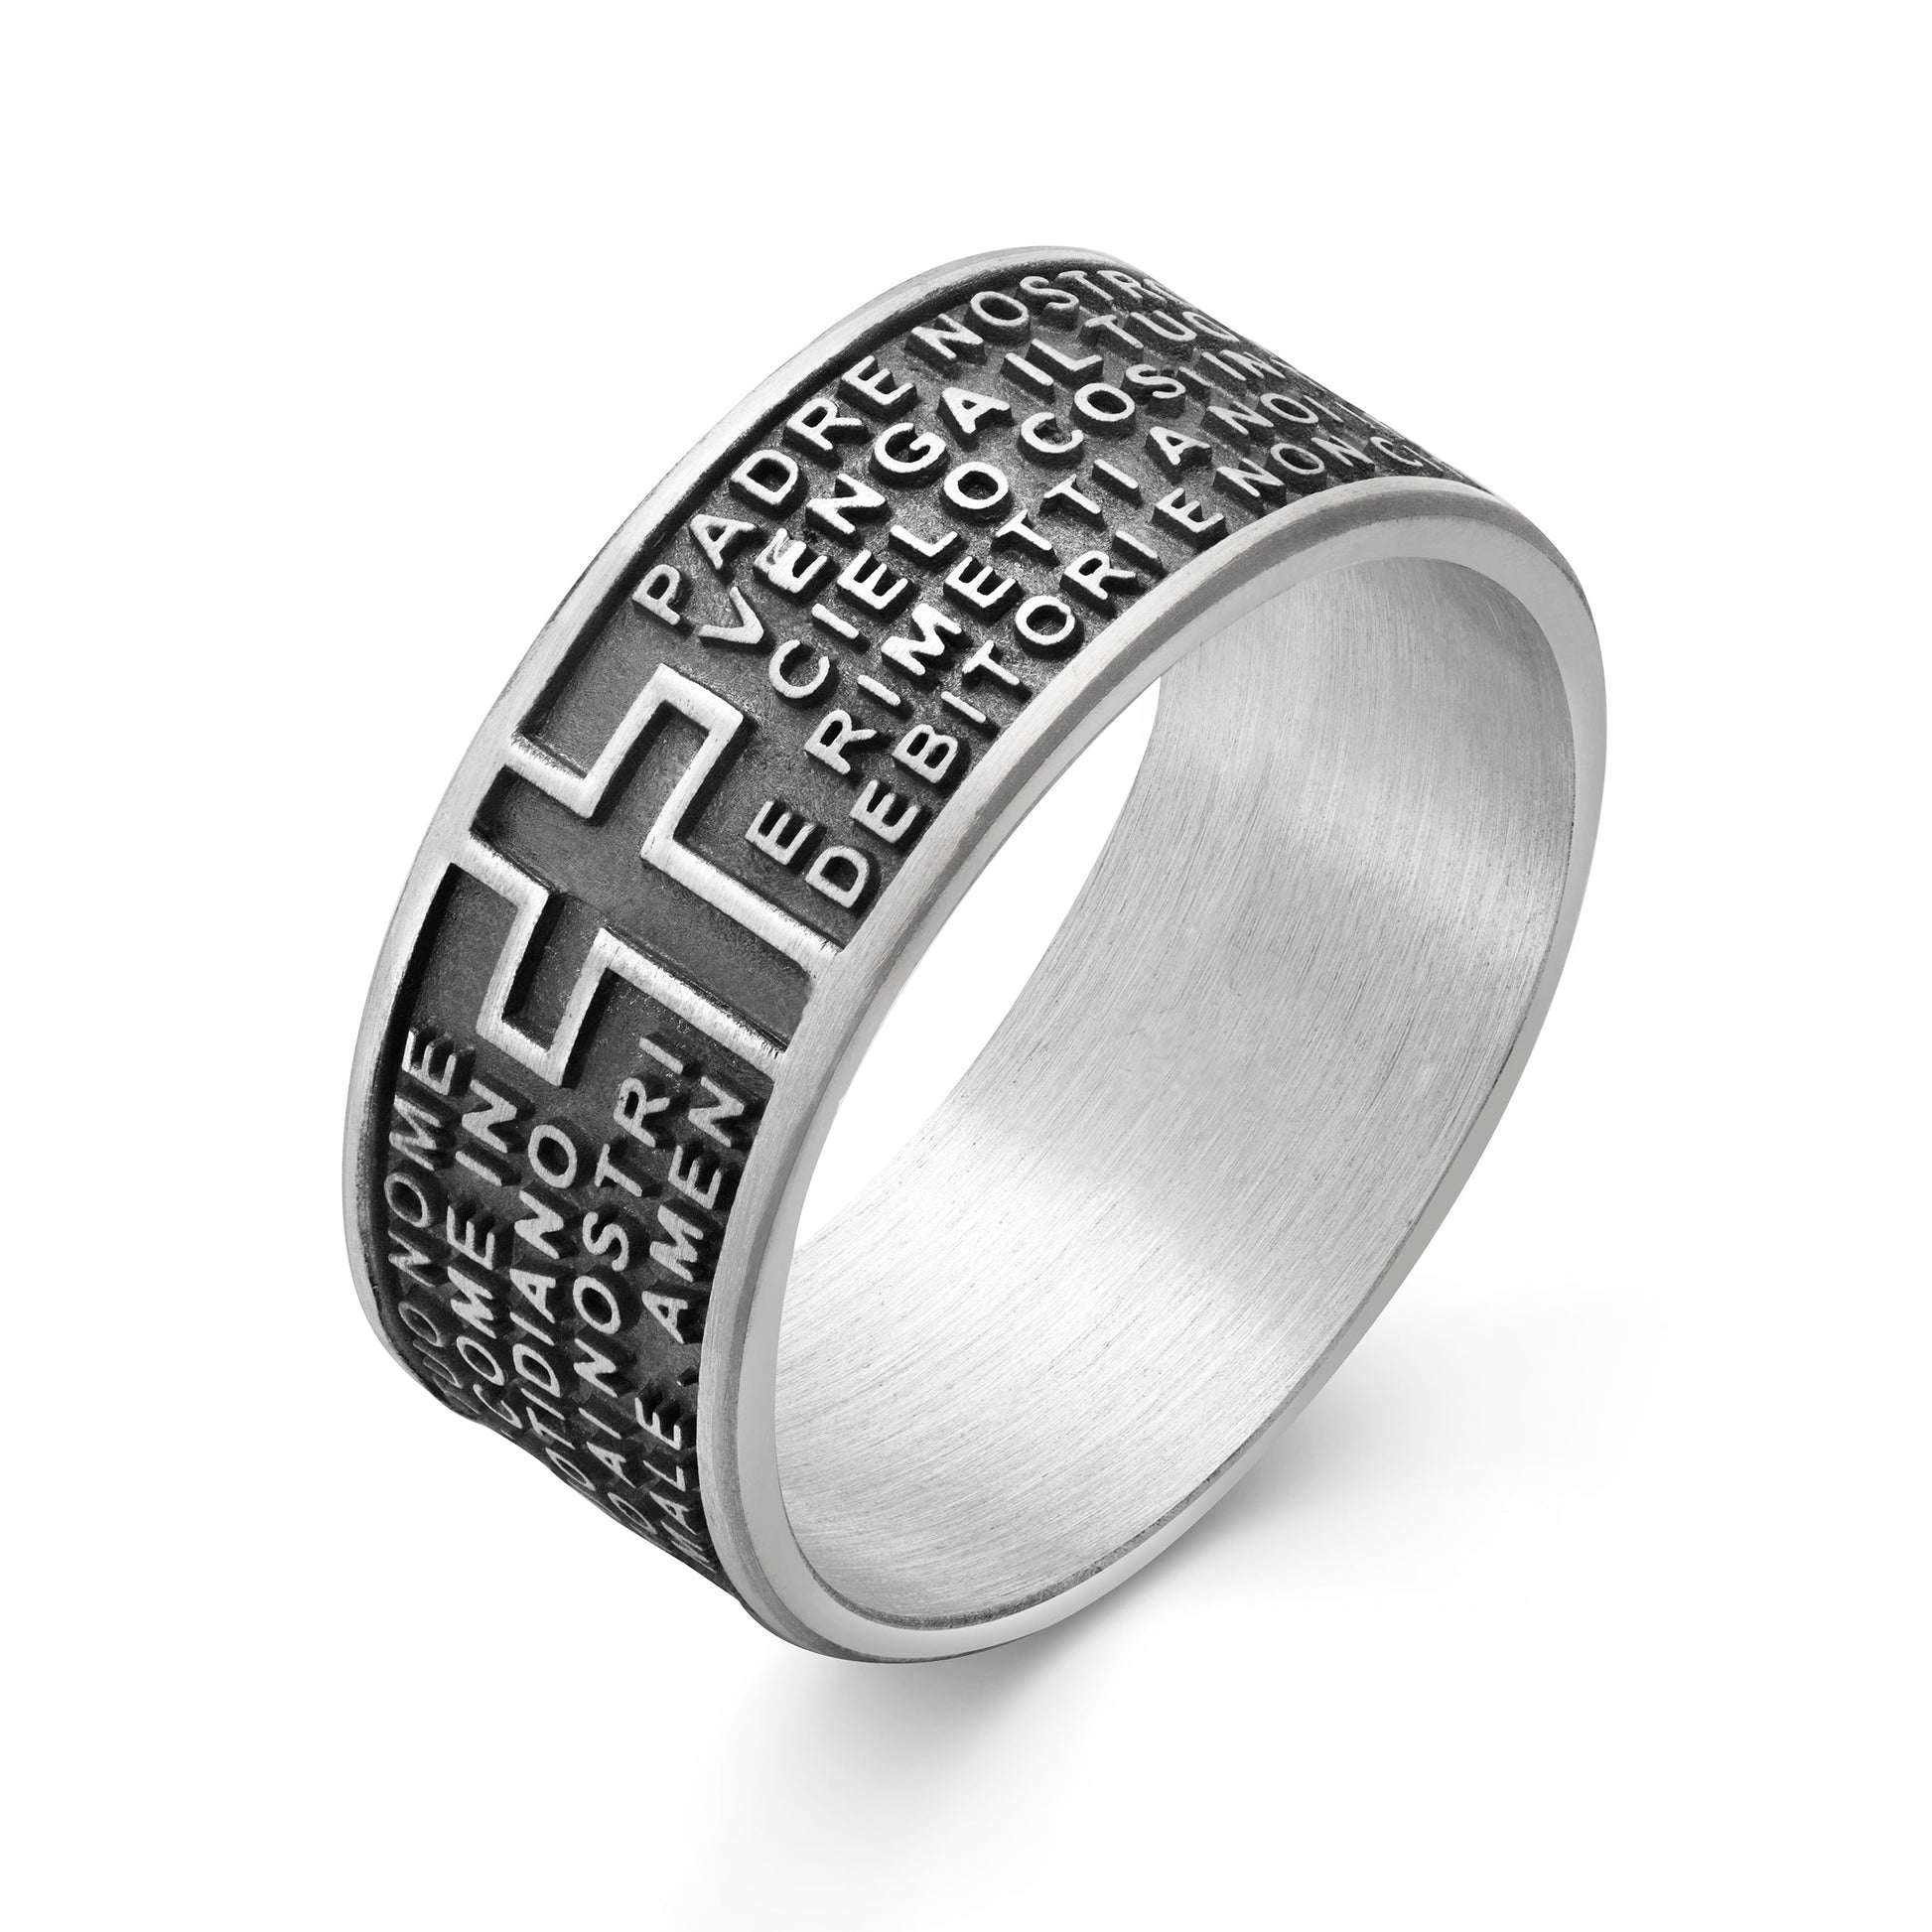 MONDO CATTOLICO Prayer Beads Sterling Silver "Our Father" Ring